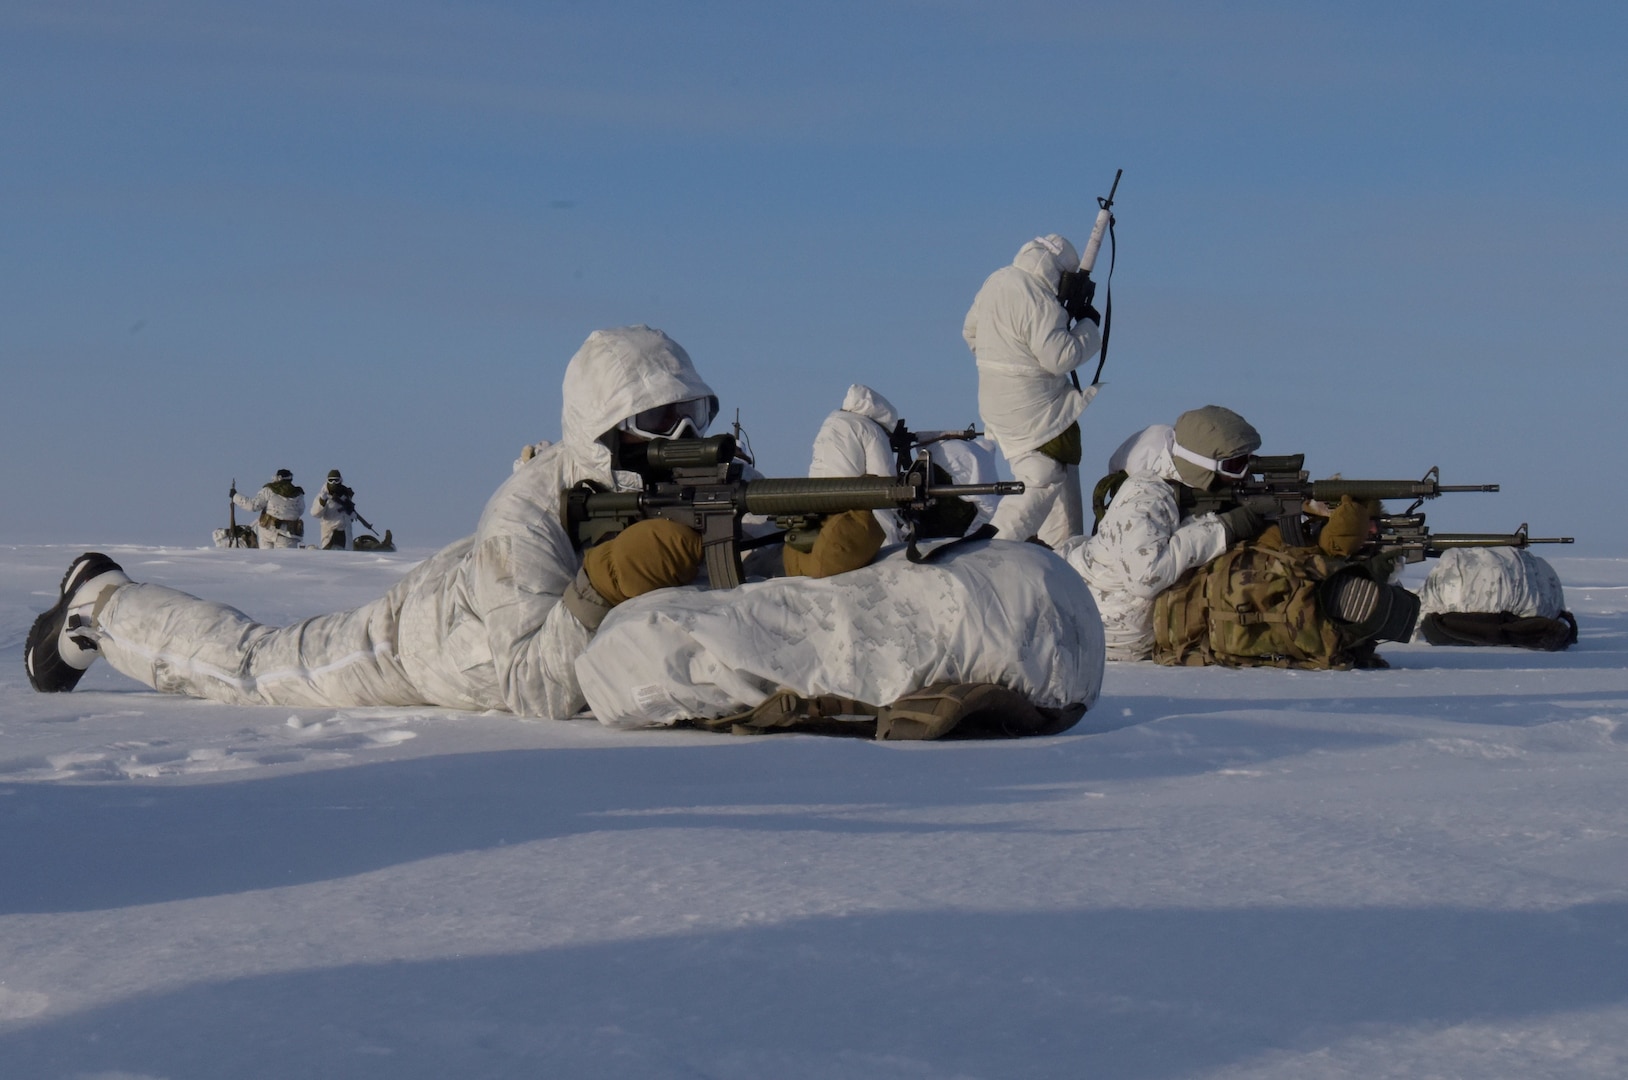 U.S. Army and Canadian Soldiers observe and secure the insertion area after disembarking from an LC-130 Hercules skiplane of the 109th Airlift Wing, New York Air National Guard, on frozen oceanic Arctic ice near Cornwallis Island, Nunavut, Canada, March 15, 2023. U.S. and Canadian Soldiers and U.S. Airmen are participating in Guerrier Nordique 24 to get experience operating tactically in the high Arctic.